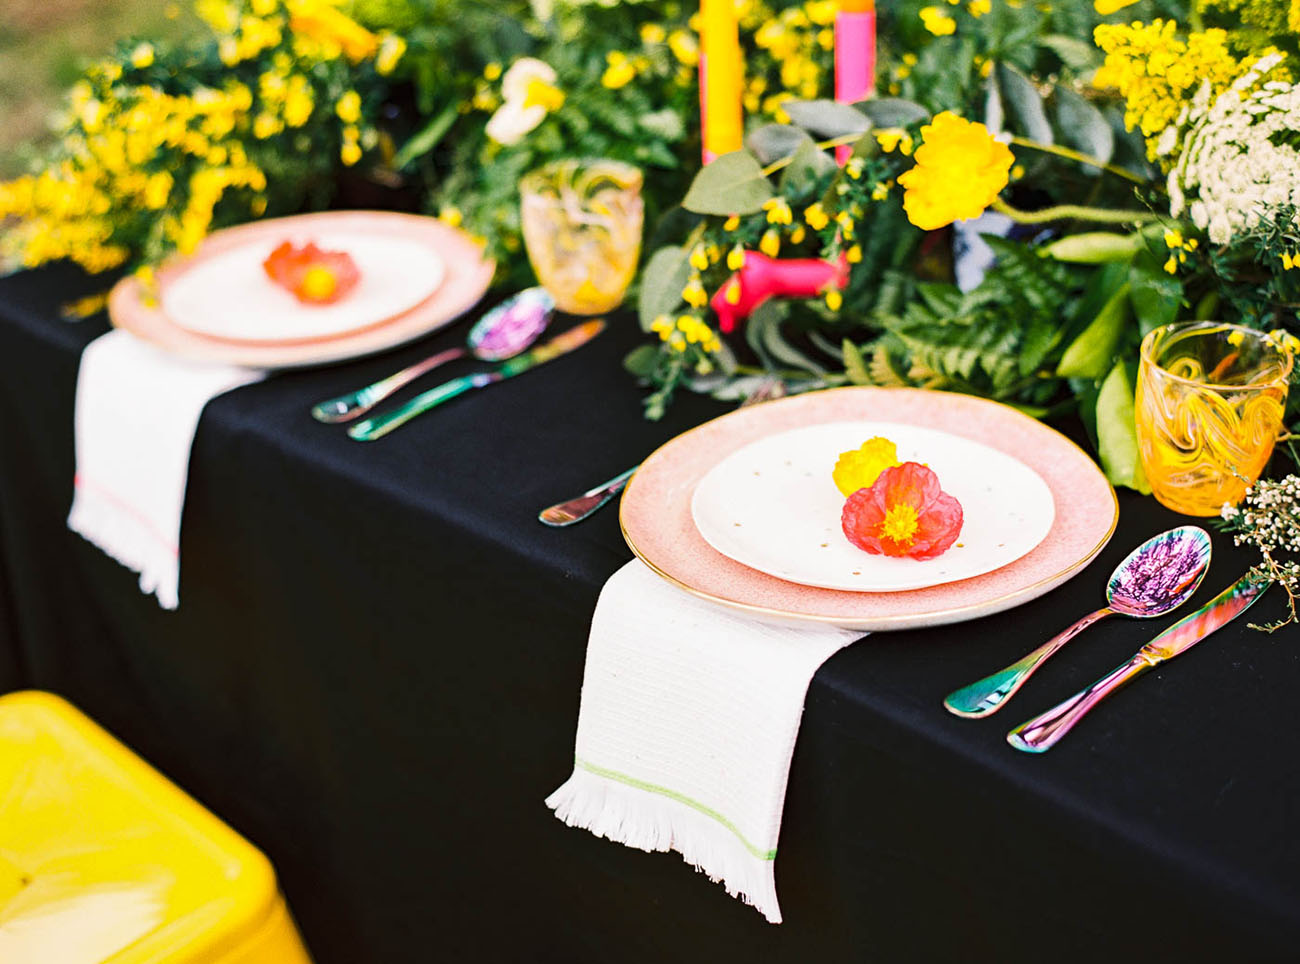 The table setting was done with a black tablecloth, pink plates, colorful flatware and neon colored candles